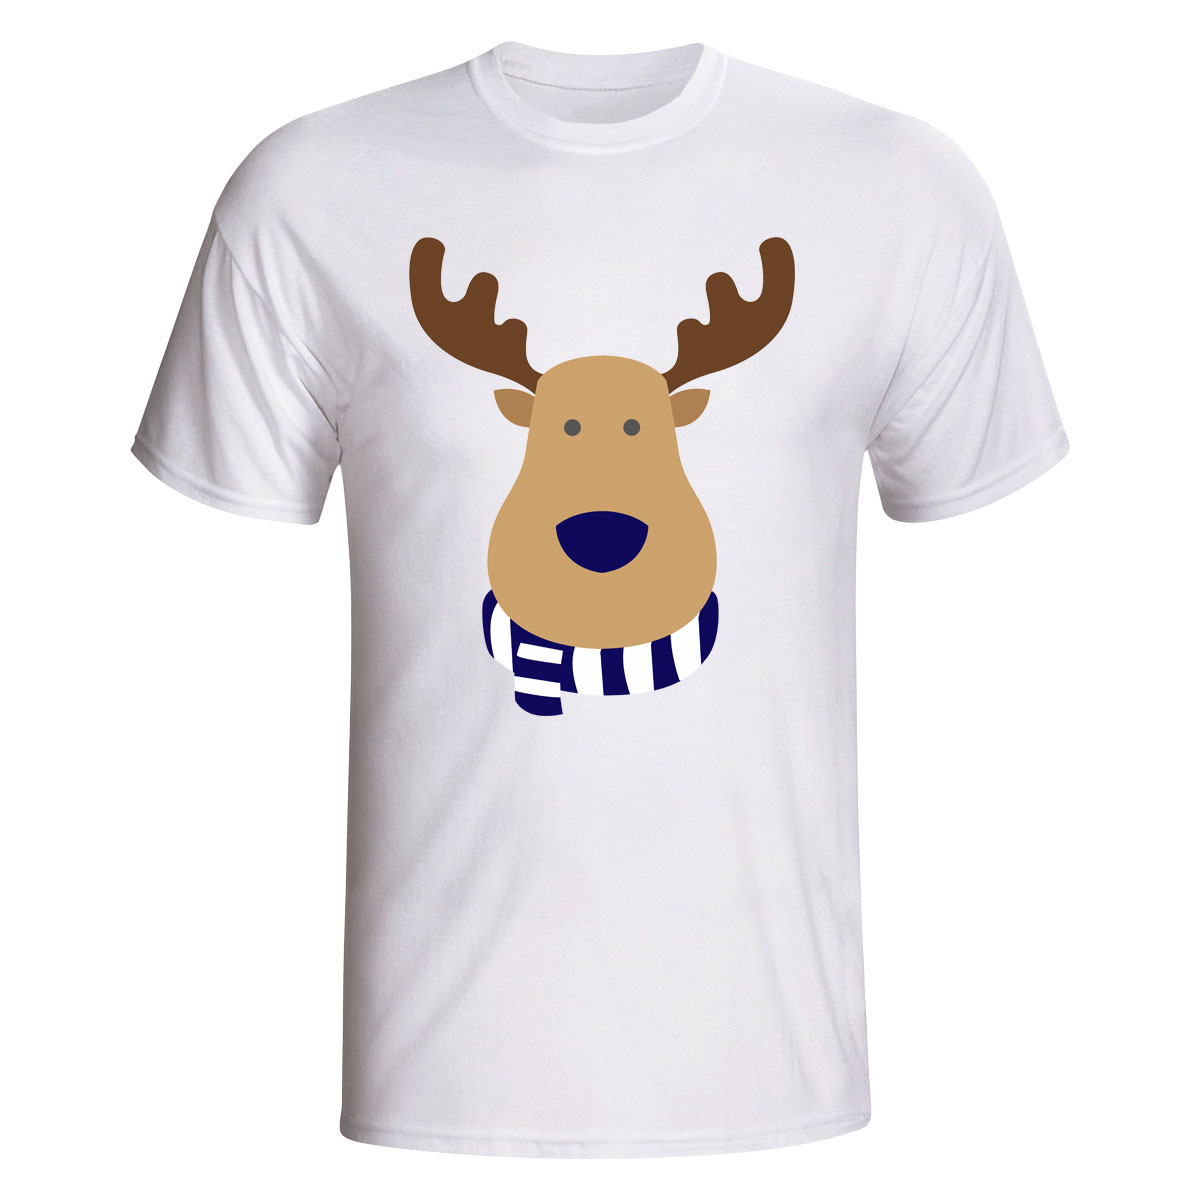 Bolton Rudolph Supporters T-shirt (white)